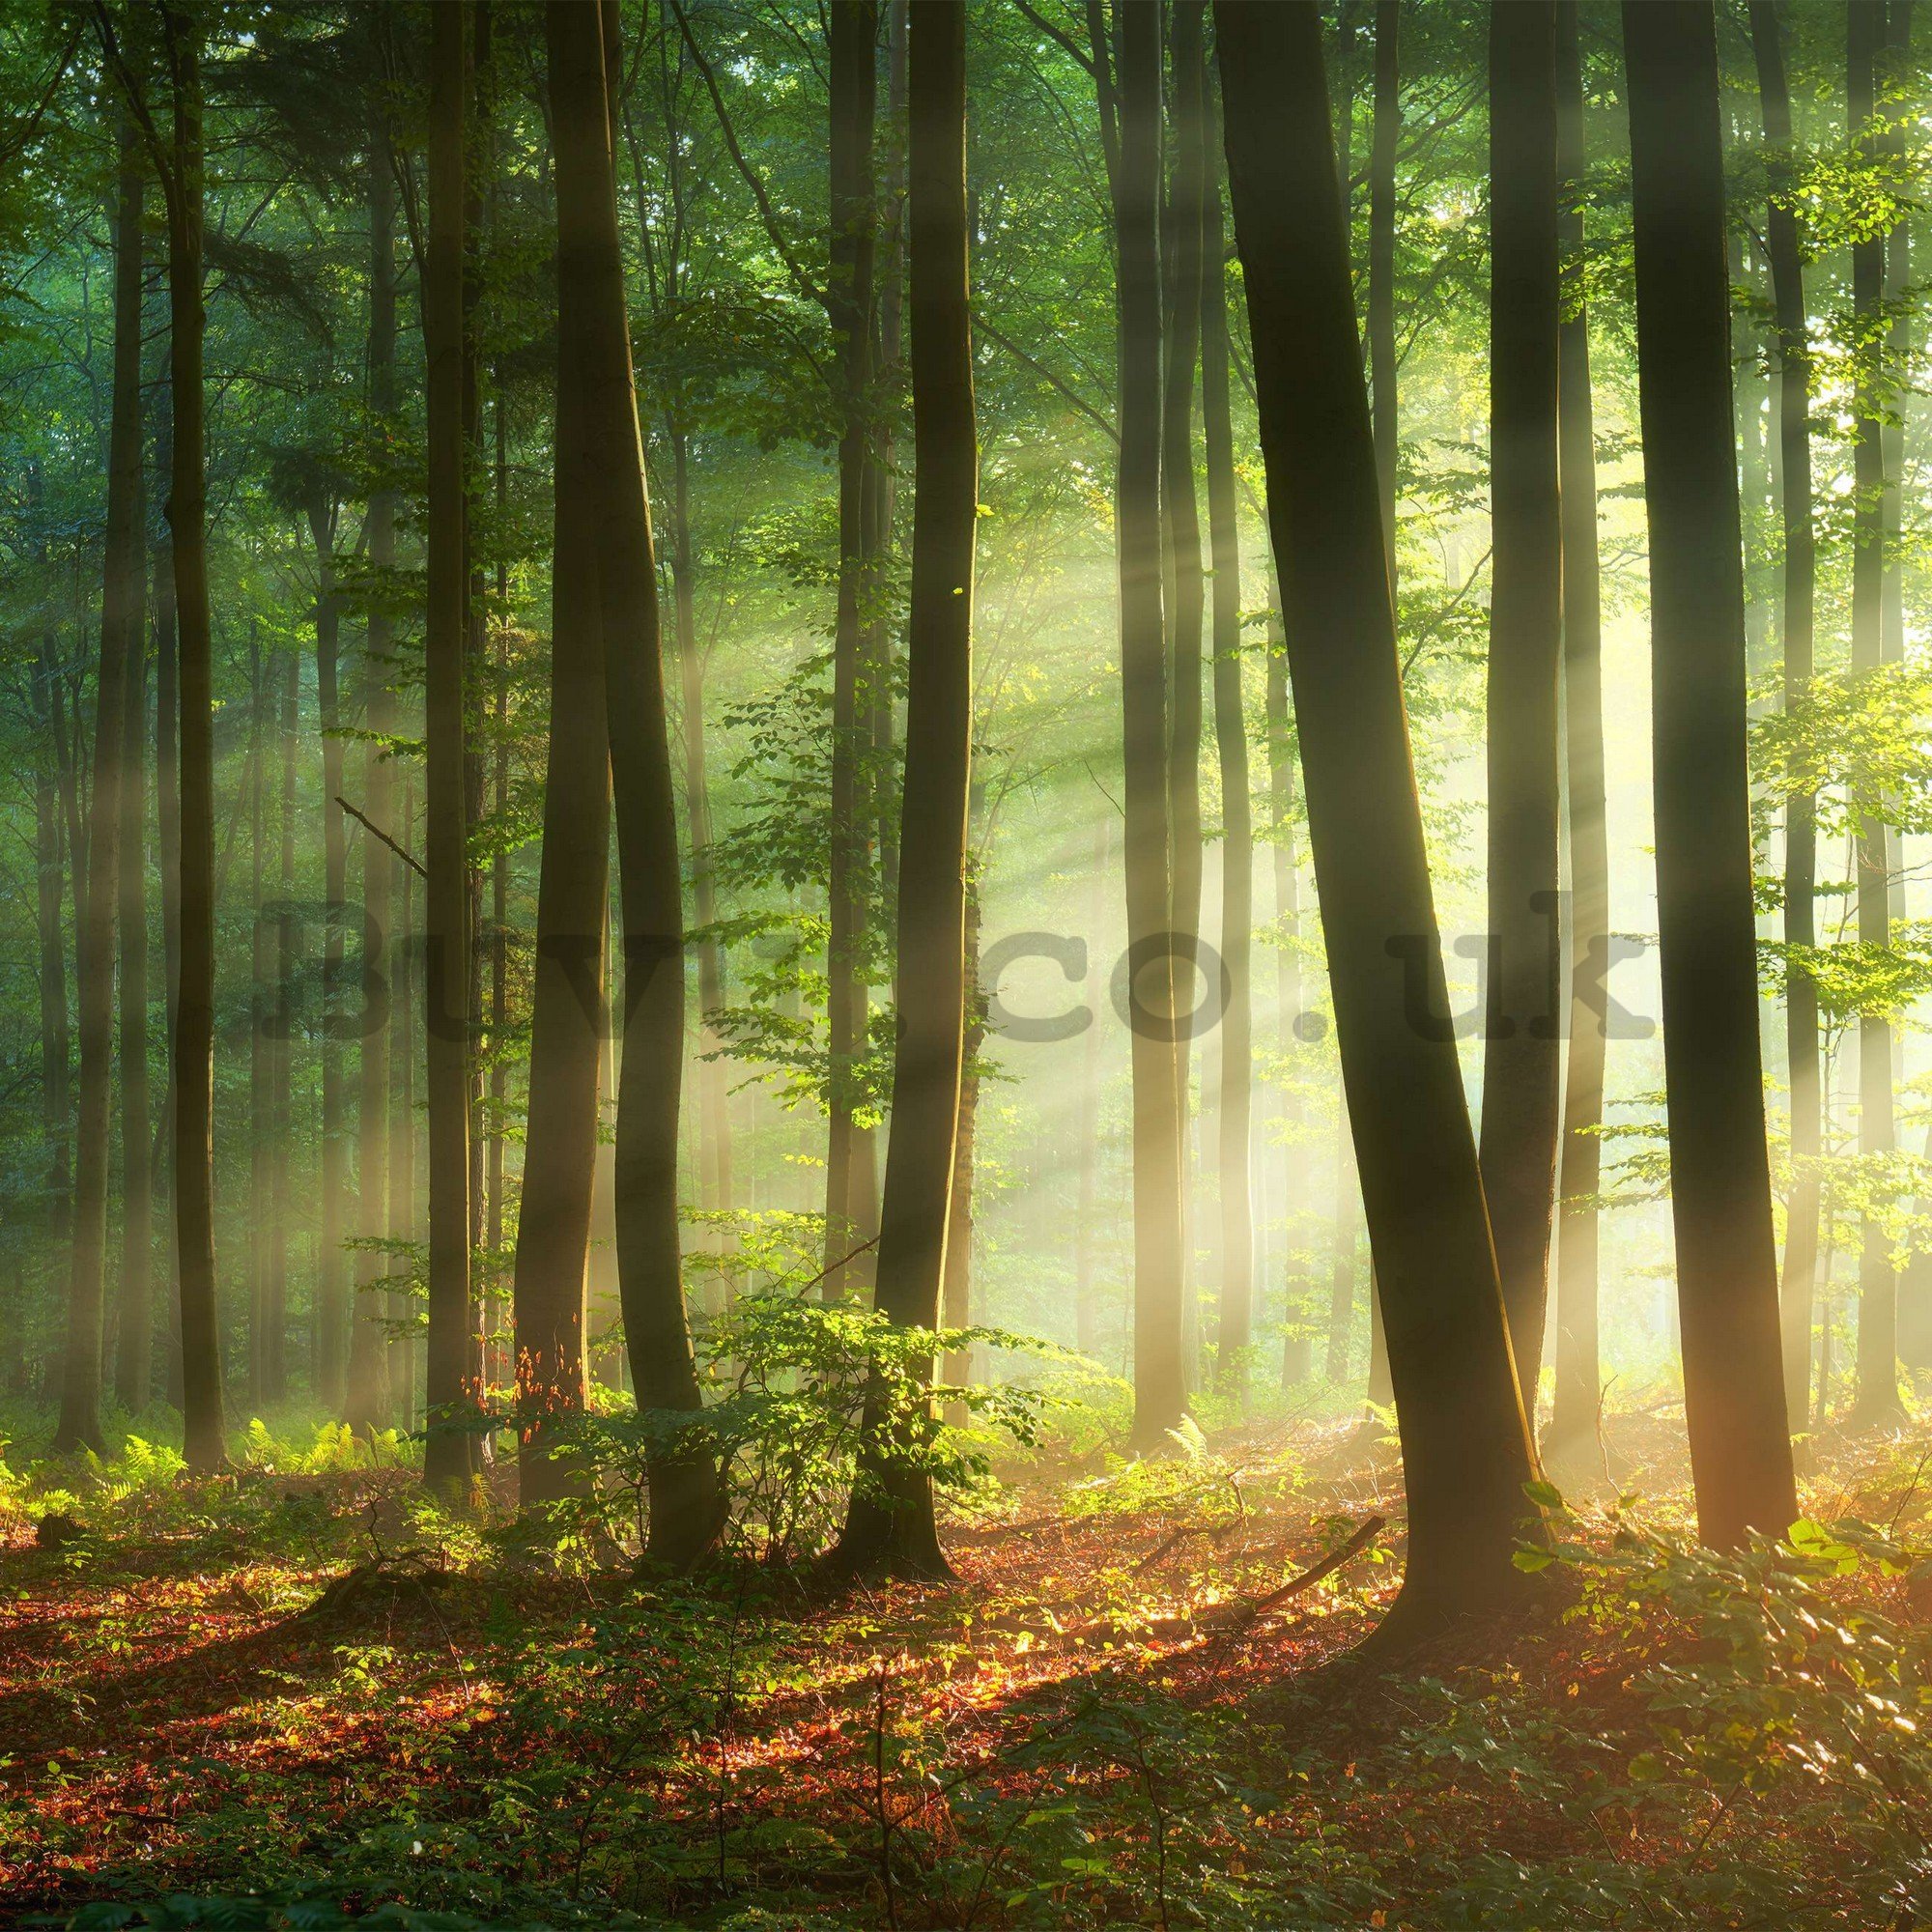 Wall mural vlies: Sunrise in the forest - 254x184 cm